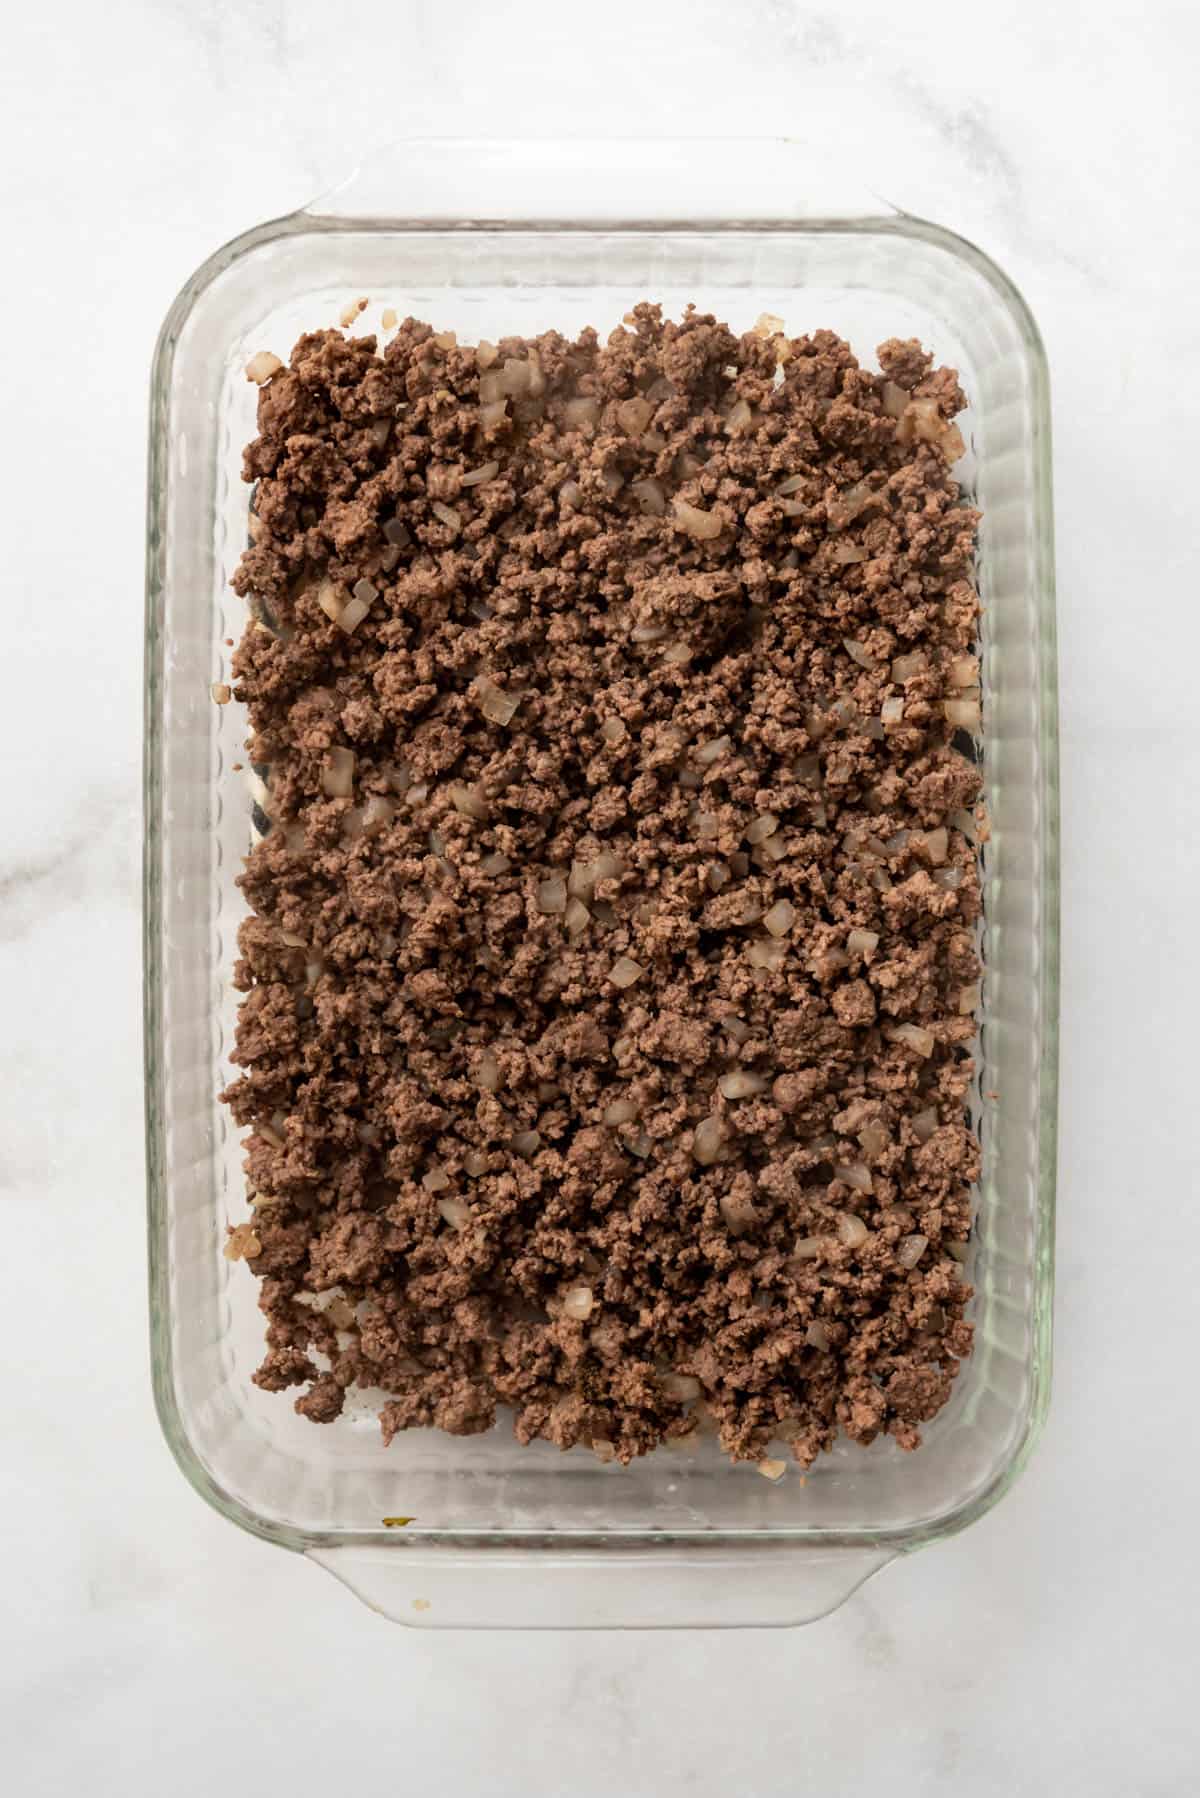 A layer of ground beef in a casserole dish.